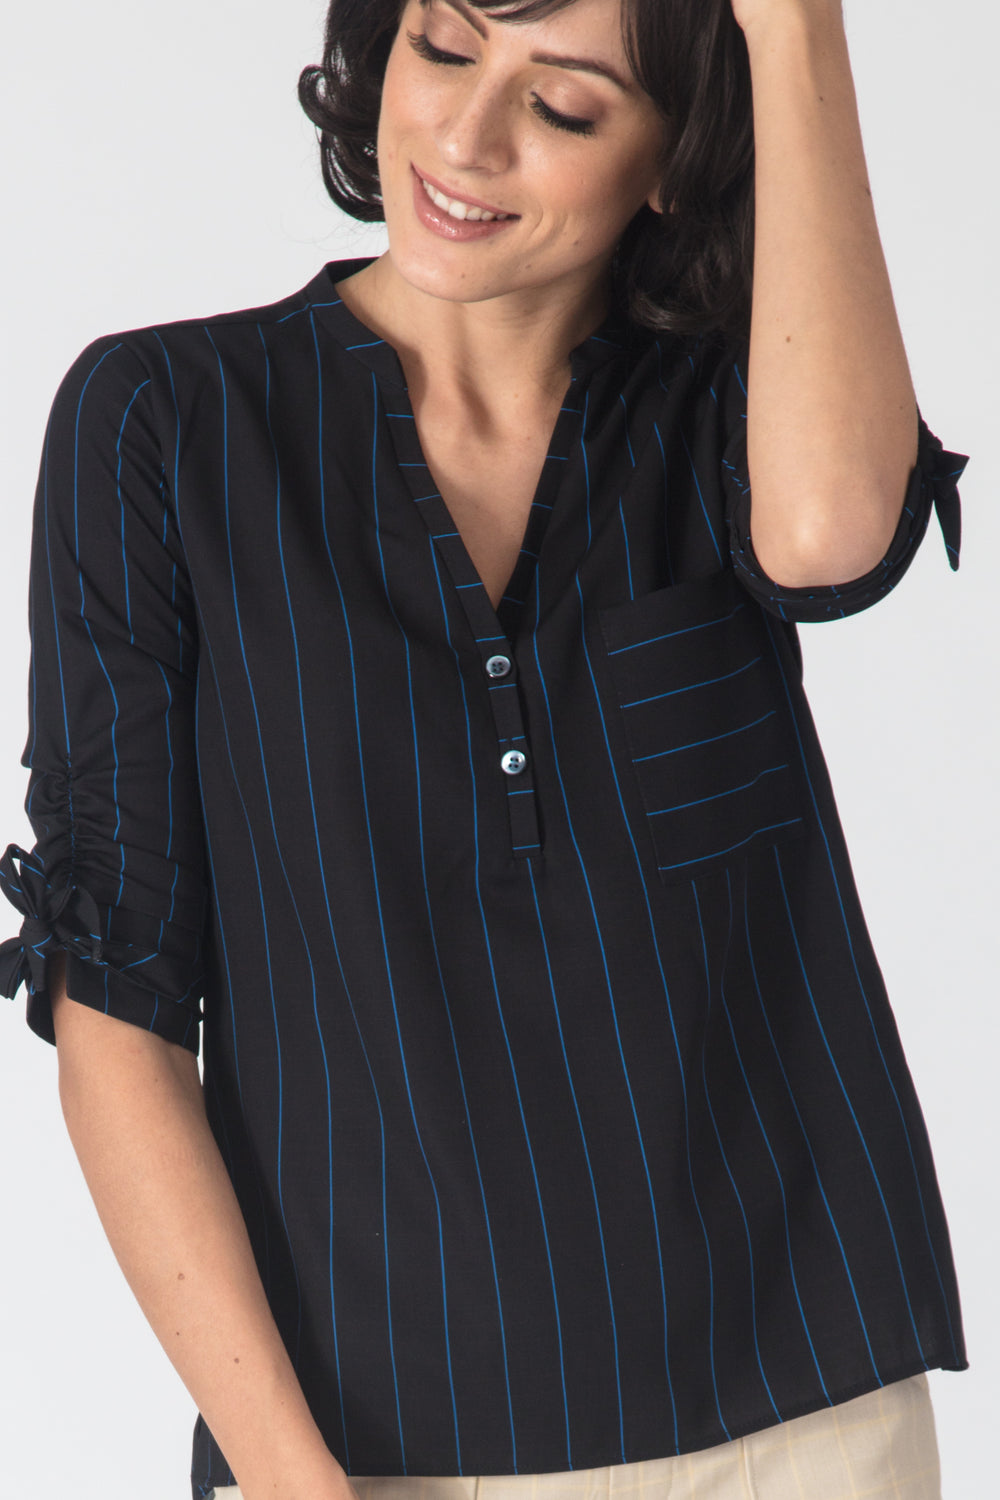 Pinstripe Pocketed Top